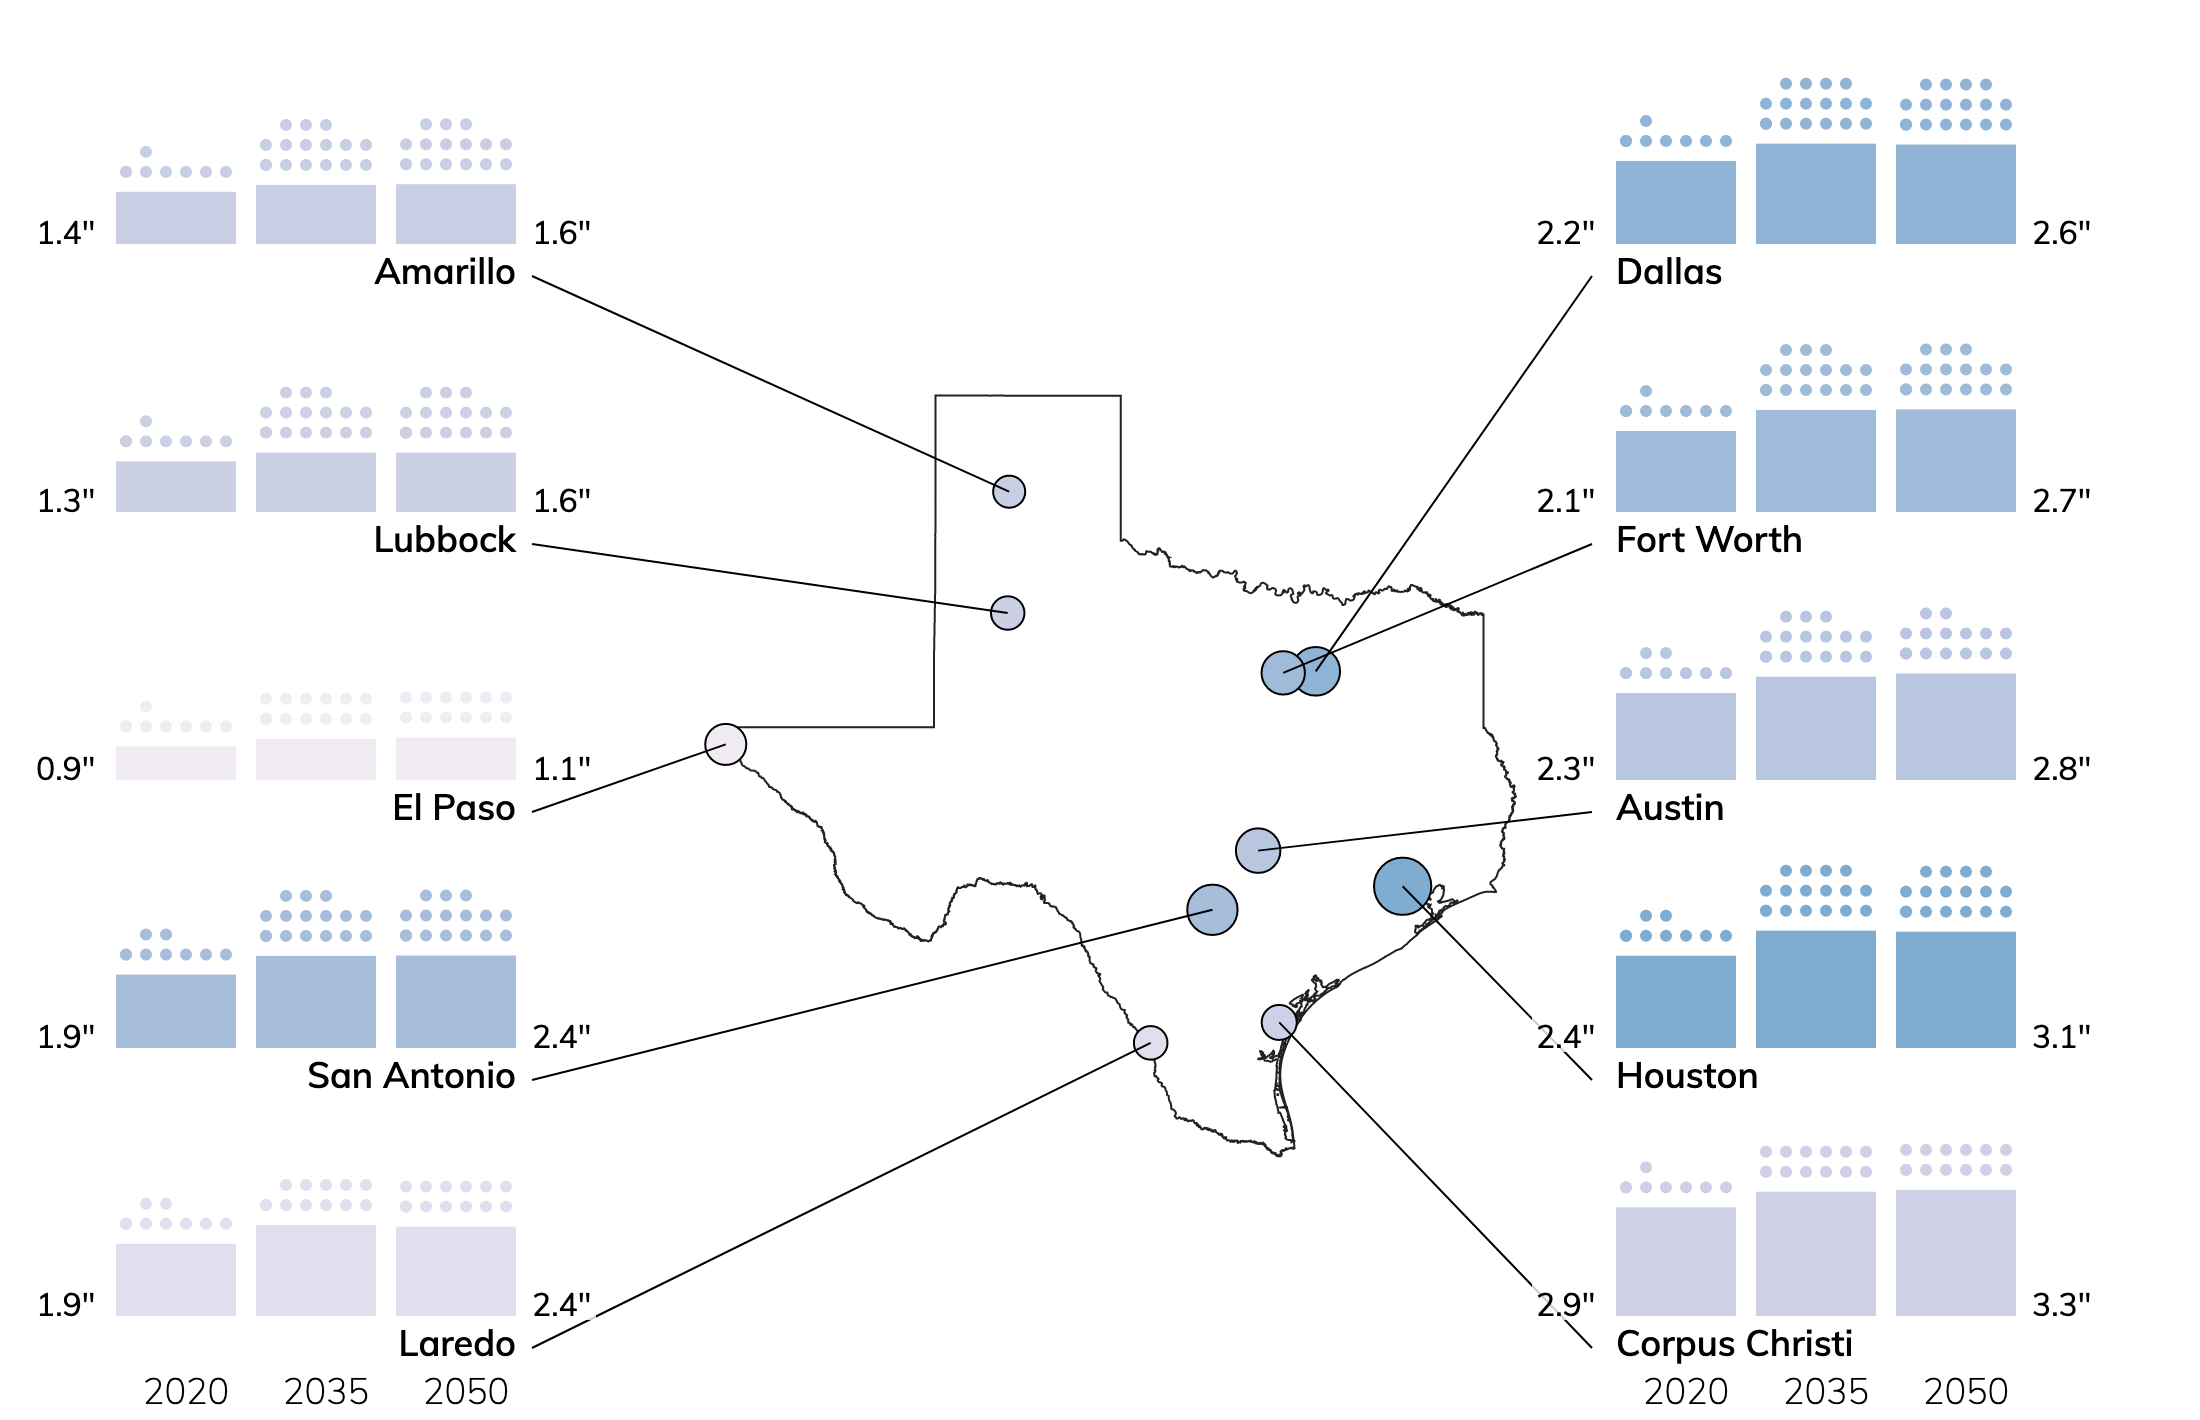 Extreme Precipitation Events and Amounts for Texas